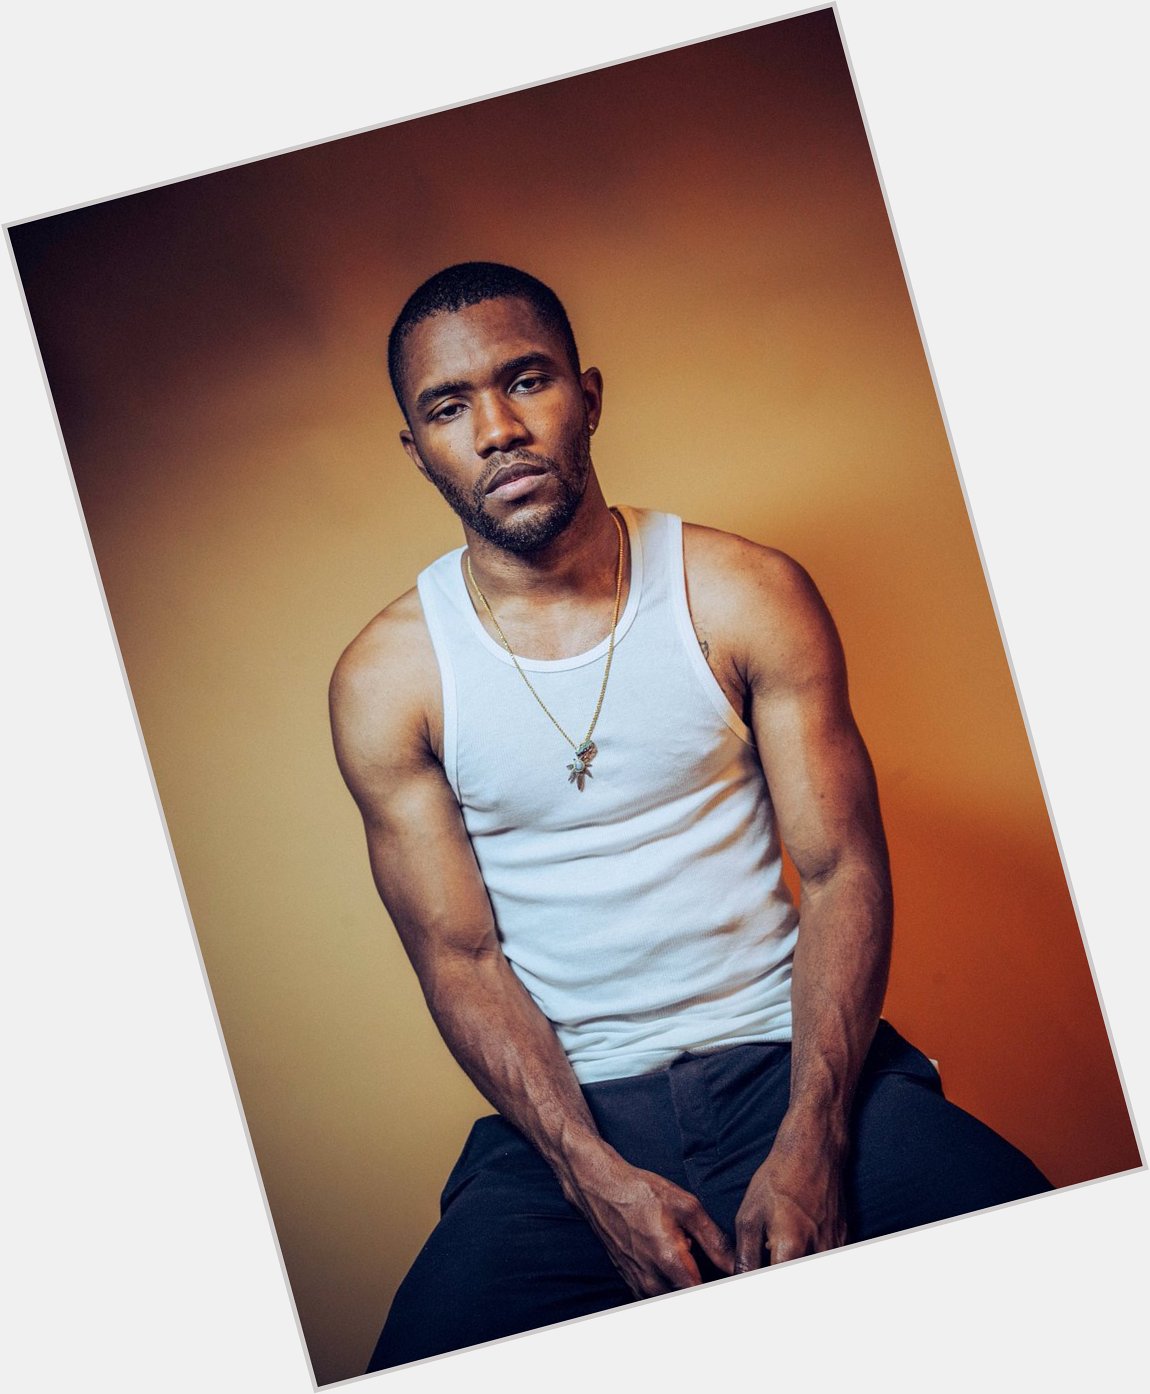 Happy Birthday Frank Ocean!  What are your top 3 songs by him? 